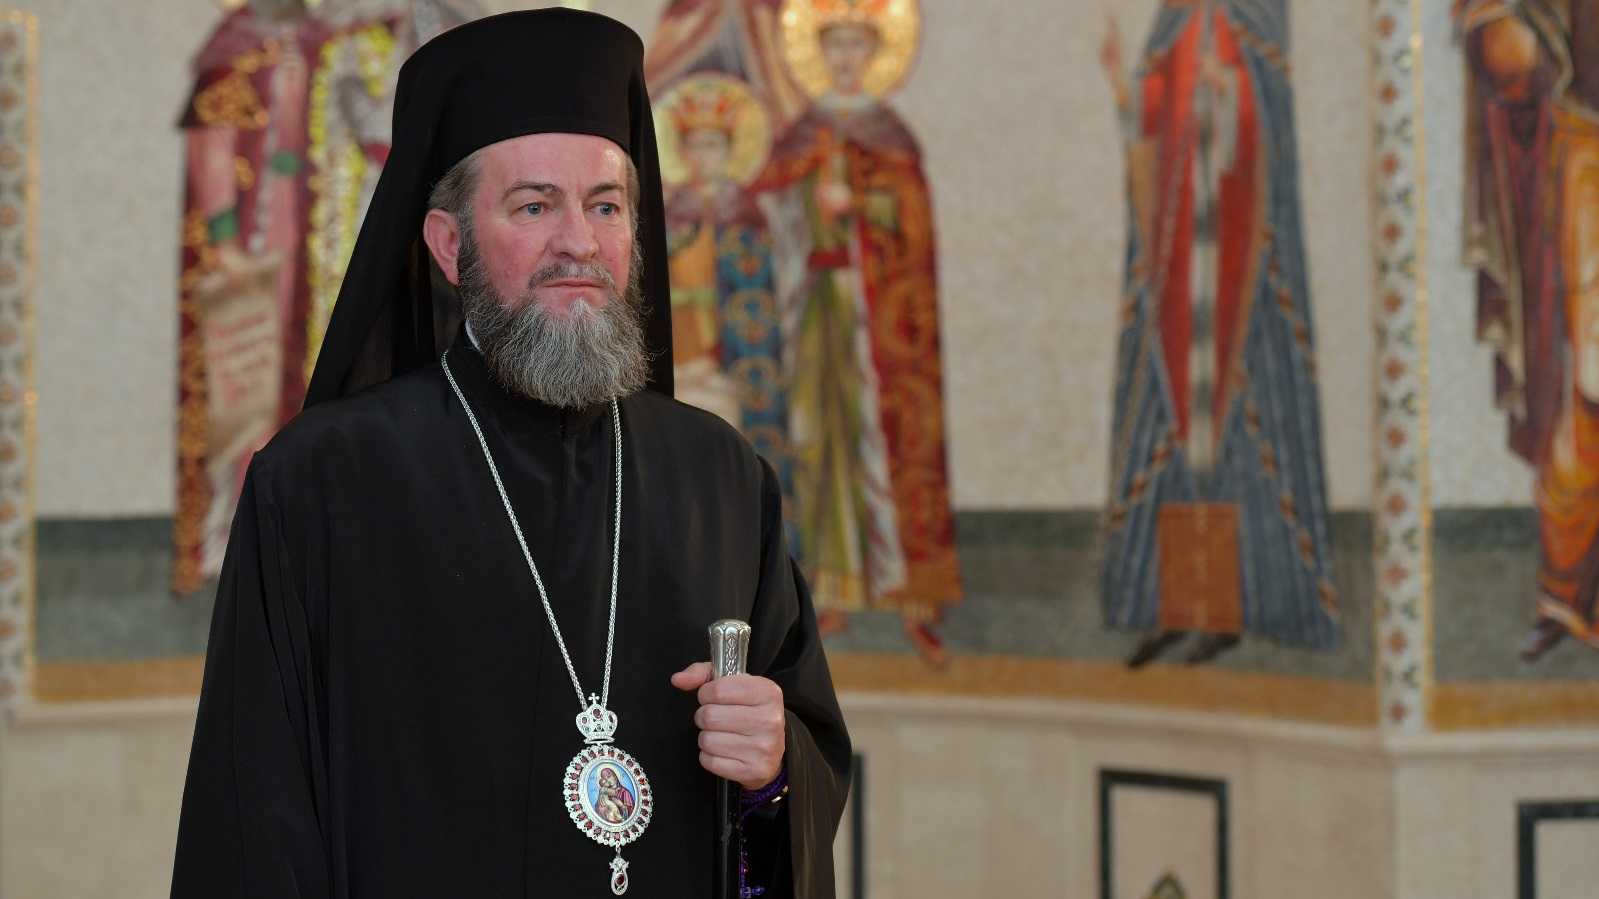 Holy Synod elects His Grace Justin as new Bishop of Maramureş and Sătmar